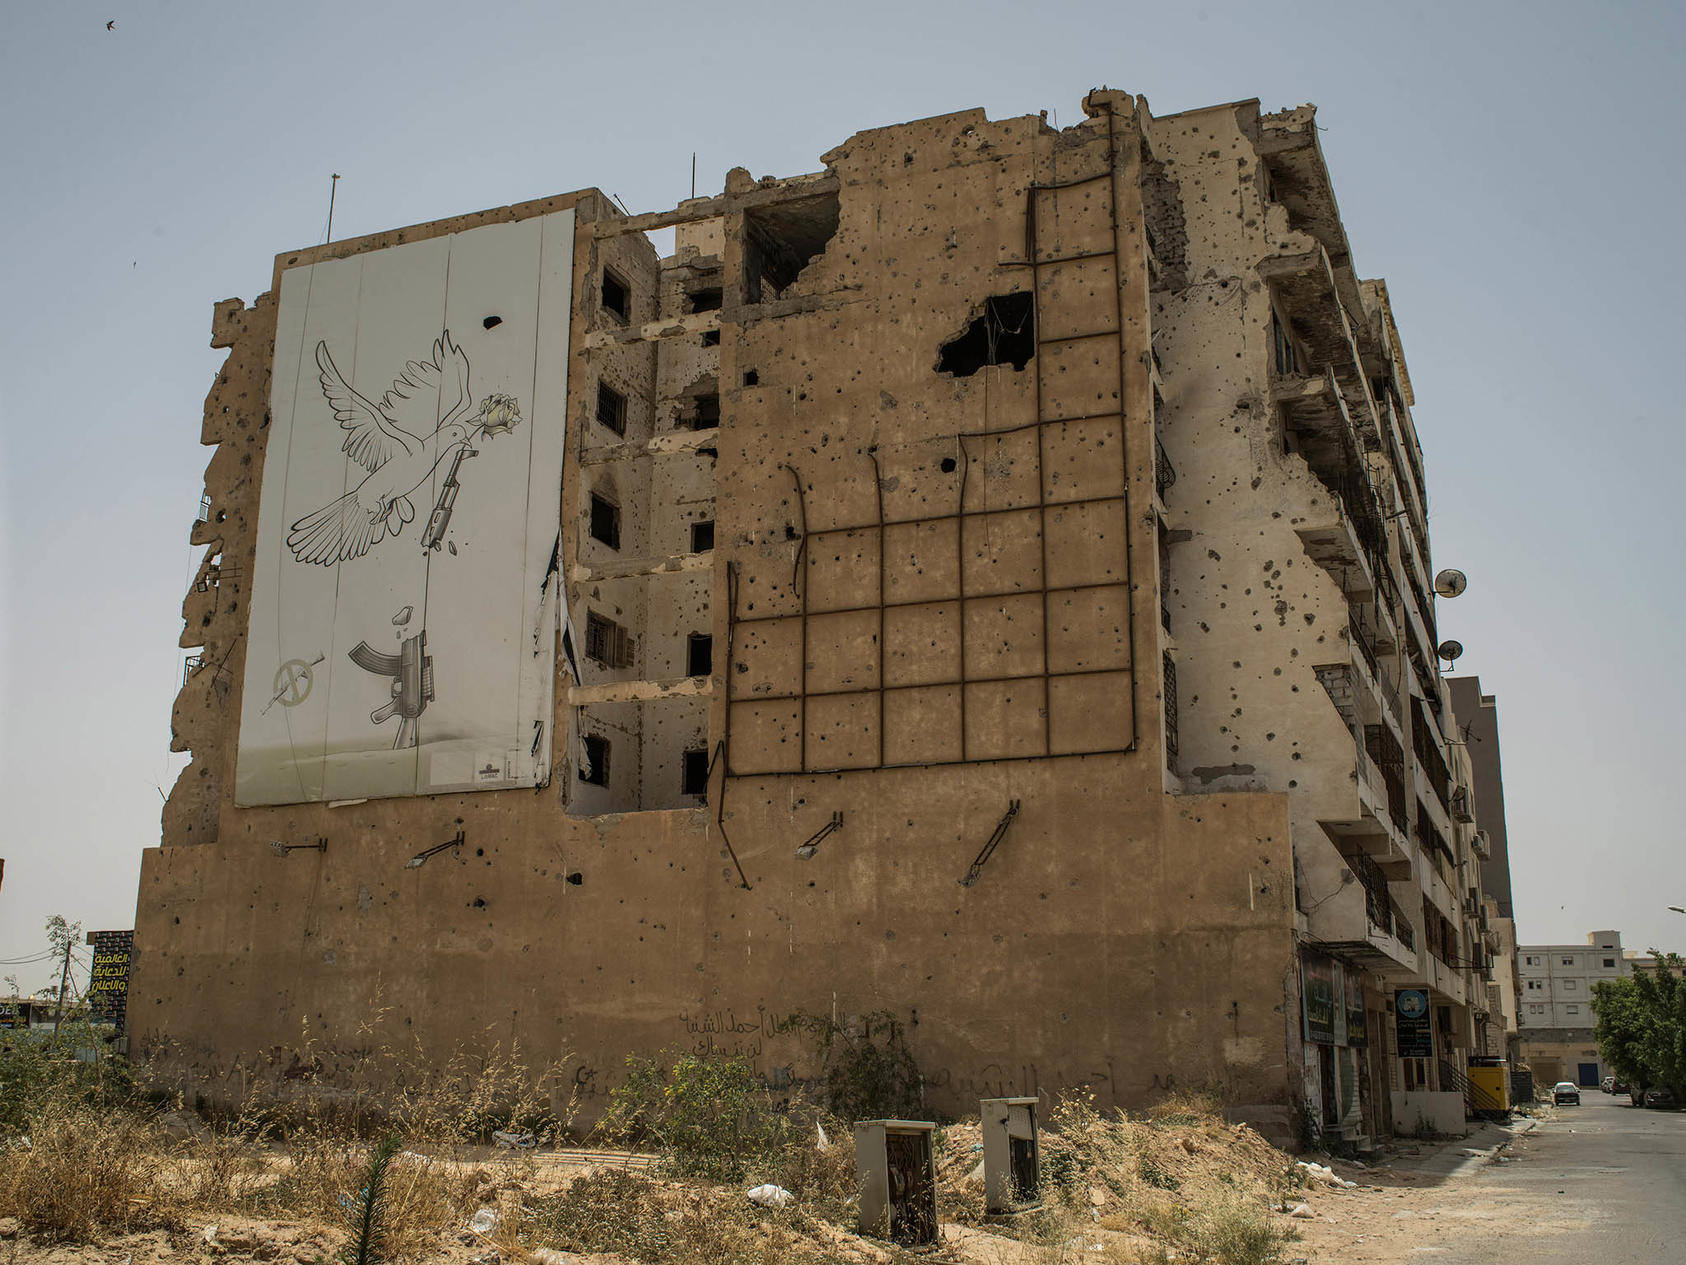 A destroyed building in Misrata, Libya’s third-largest city, May 27, 2022. (Laura Boushnak/The New York Times)